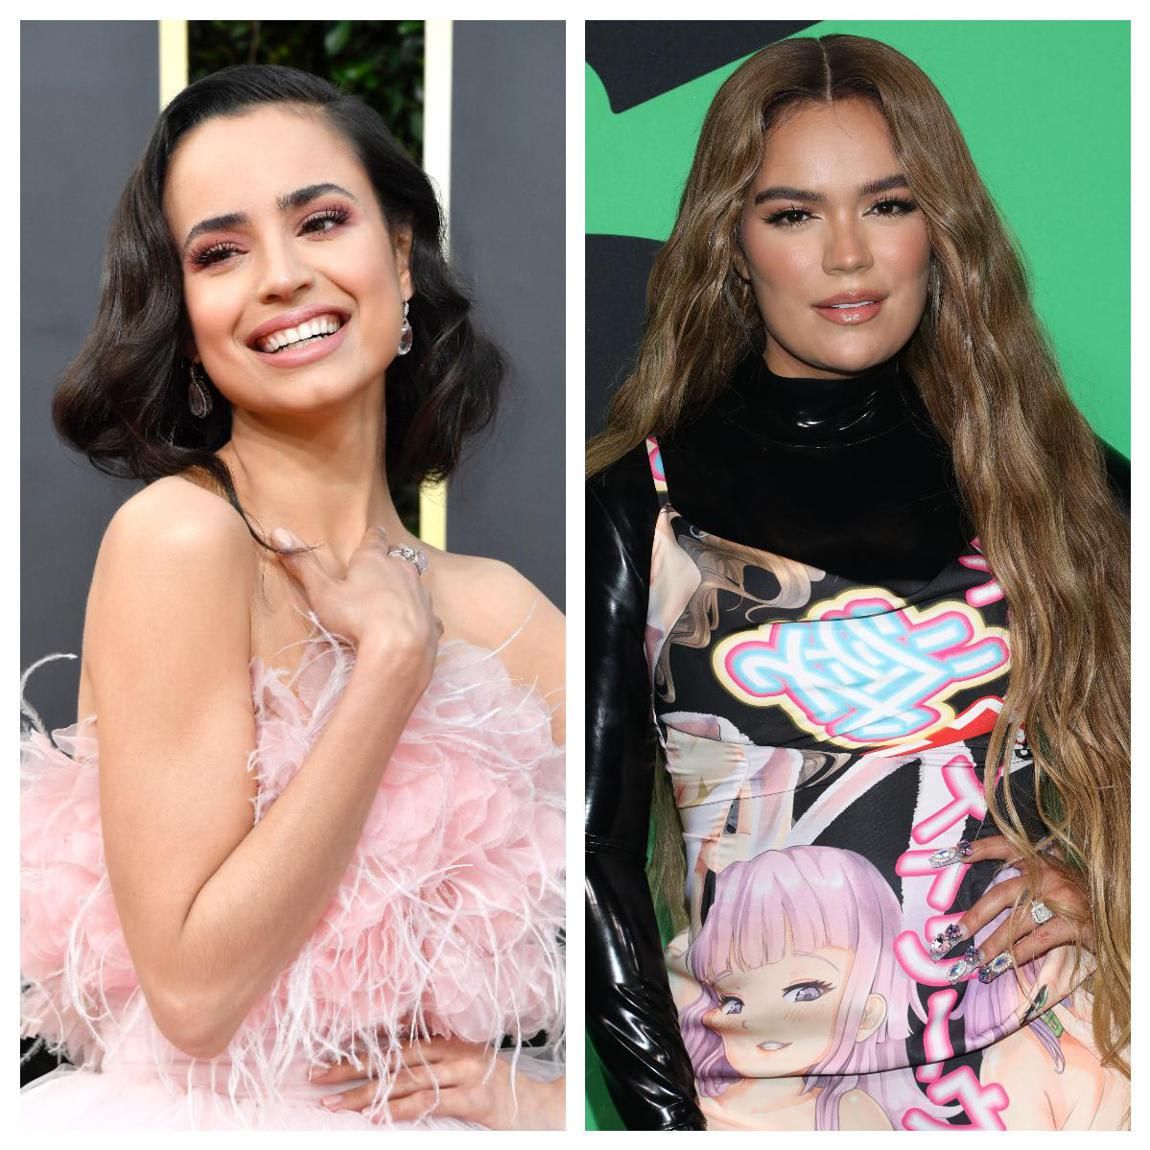 Karol G and Sofia Carson will be at the 2020 Macy's Thanksgiving Day Parade